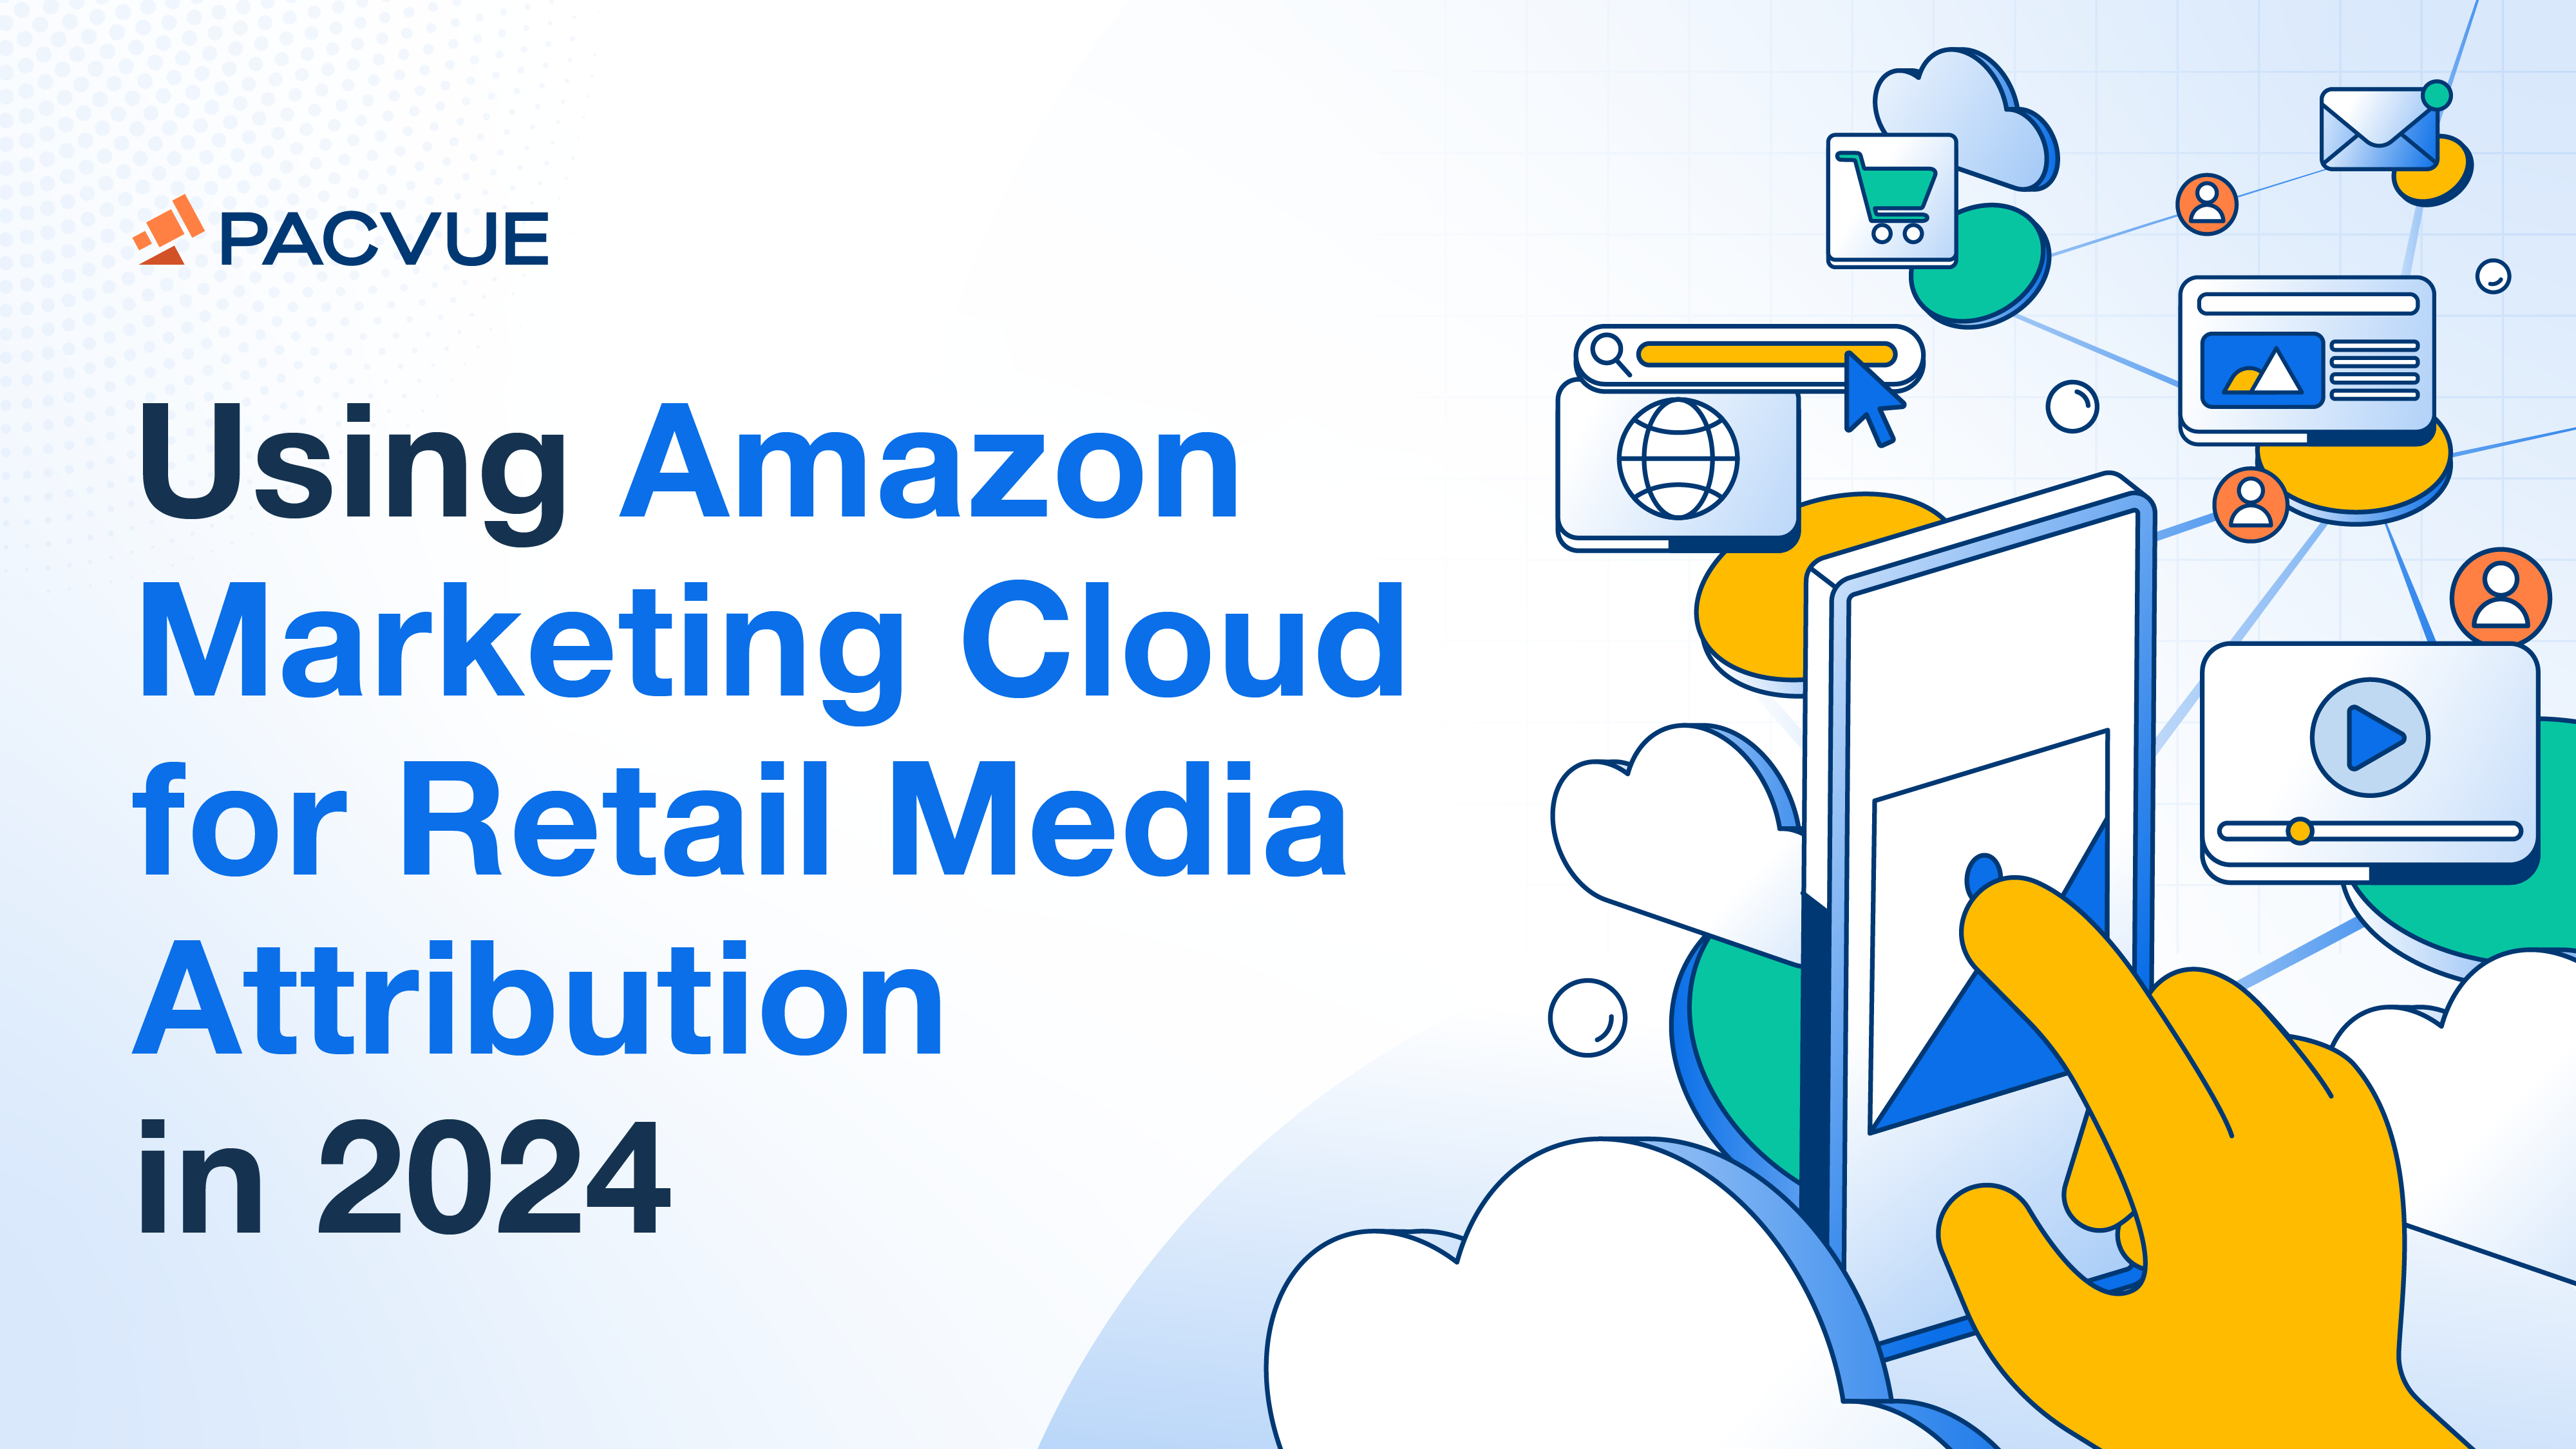 Amazon Marketing Cloud for Retail Media Attribution in 2024